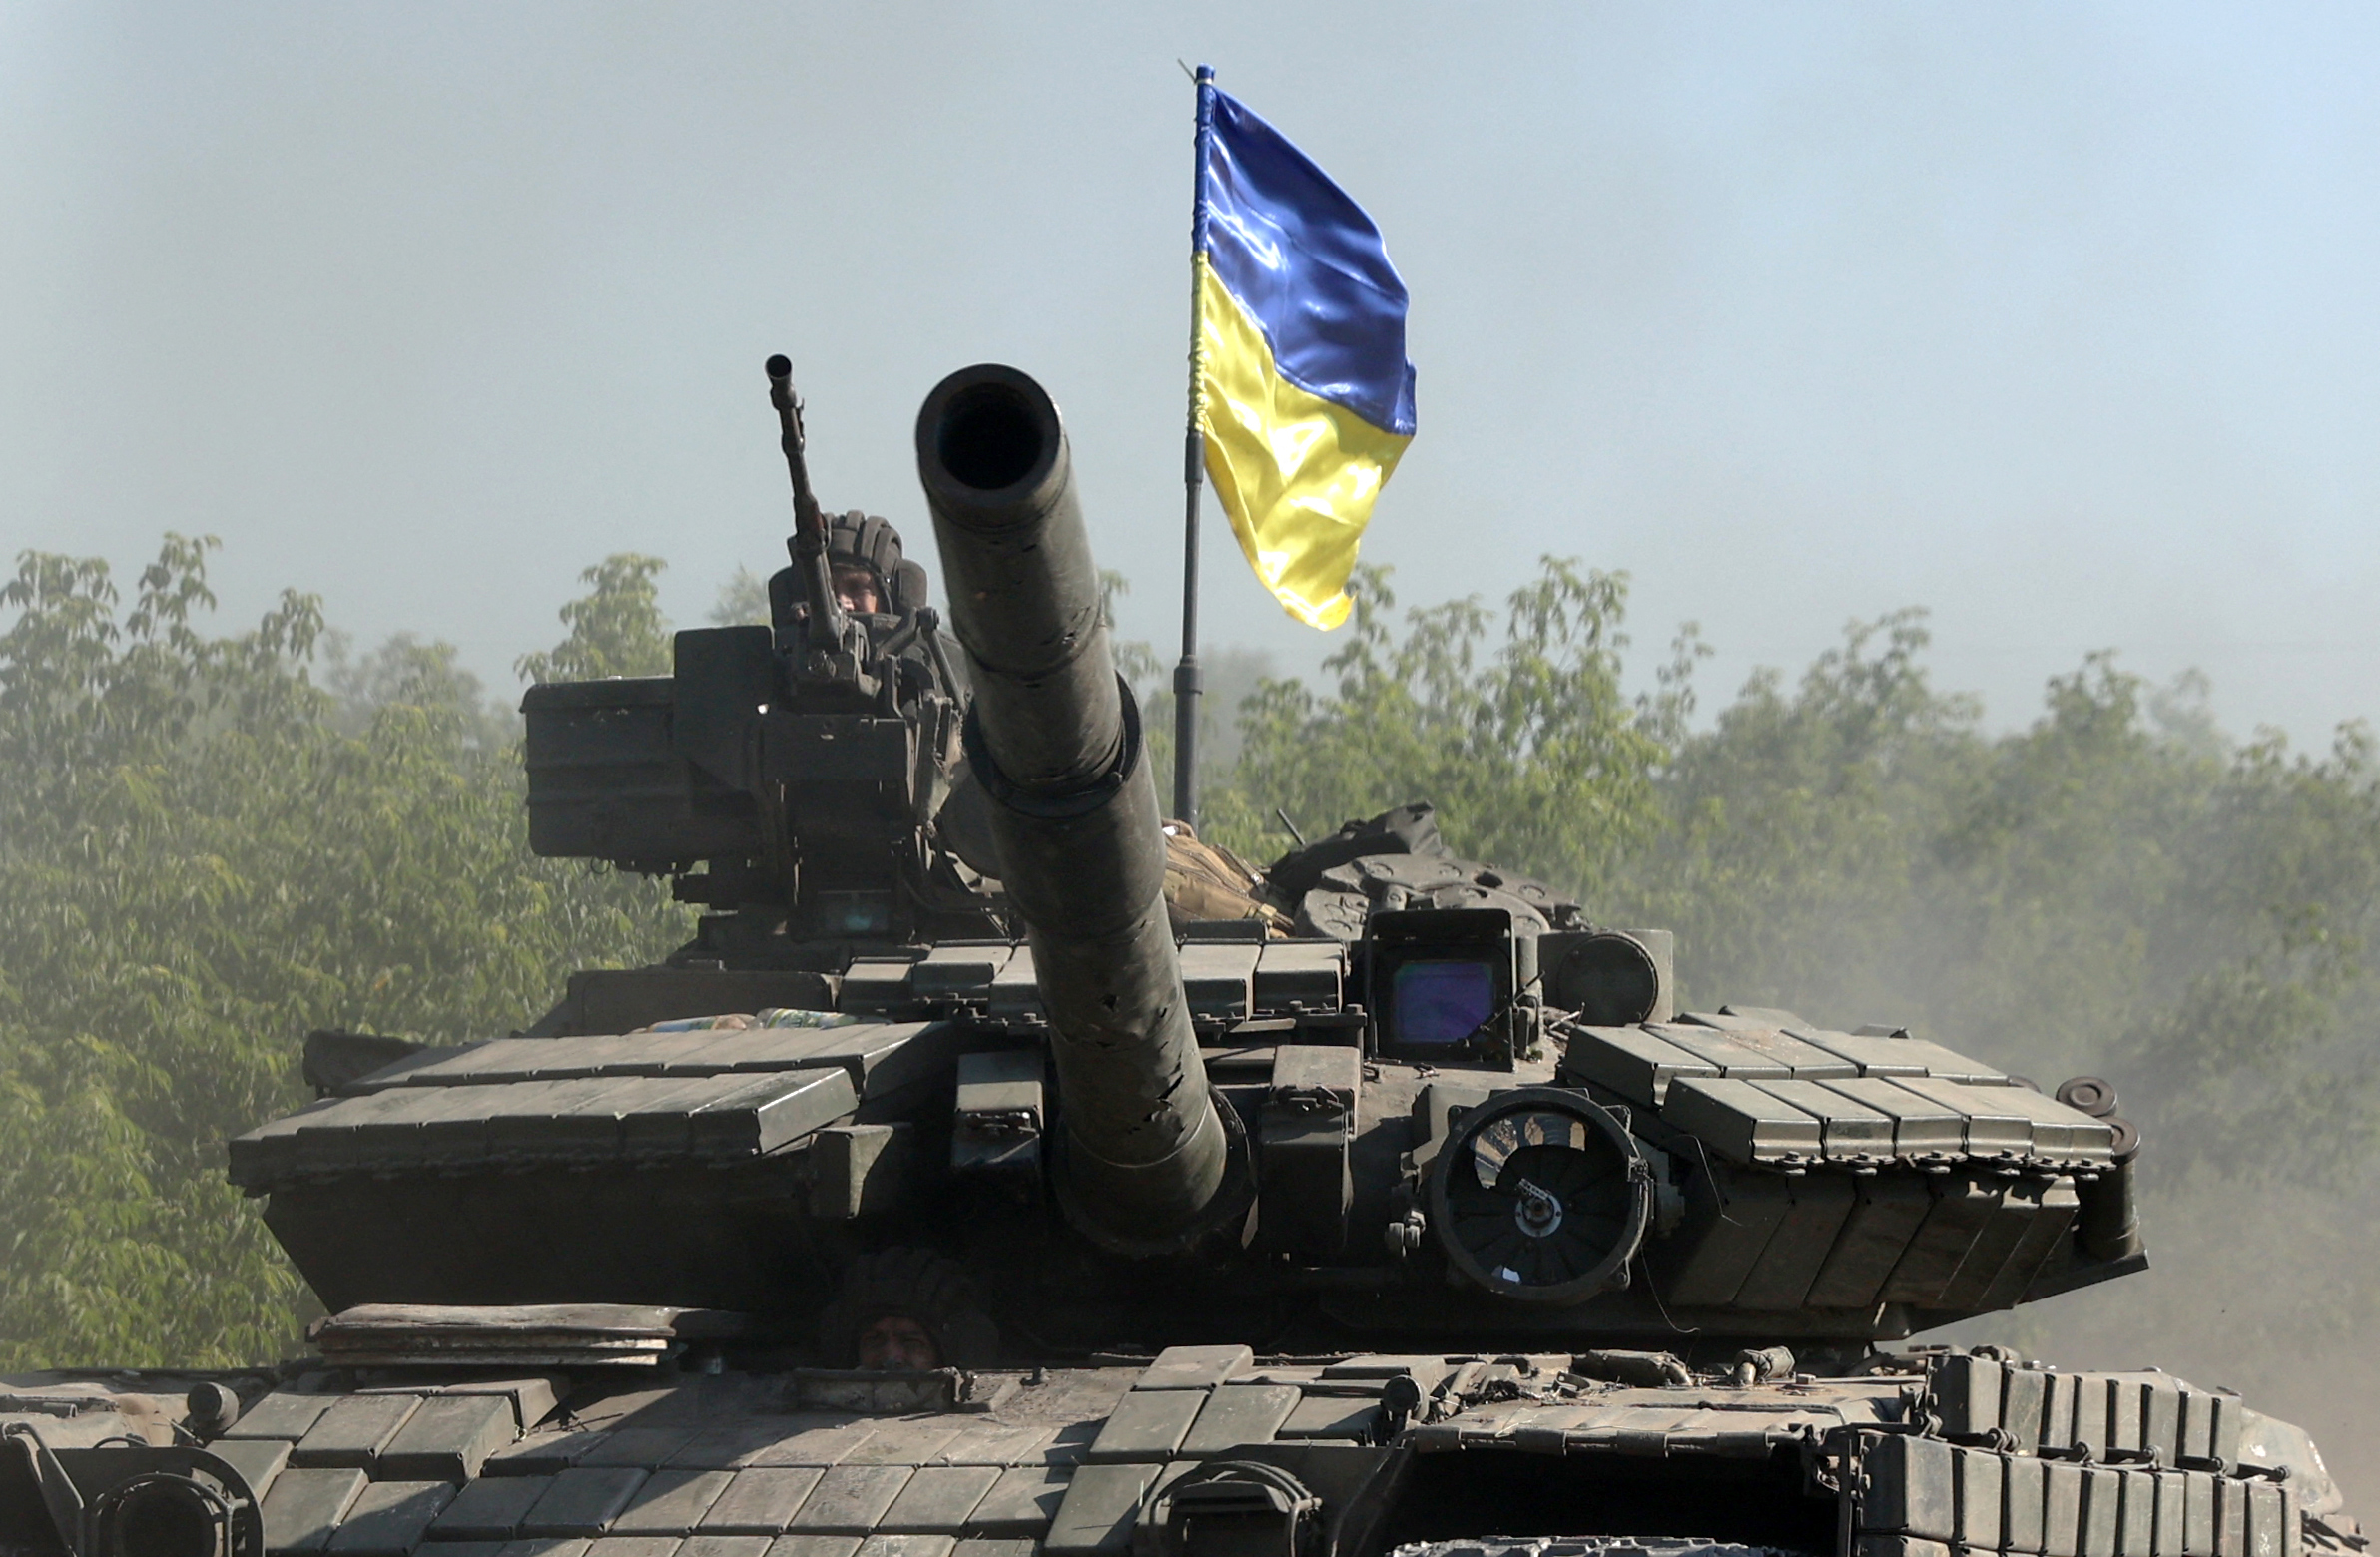 As Ukraine withdraws from Sievierodonetsk, Battle of Donbas enters next phase